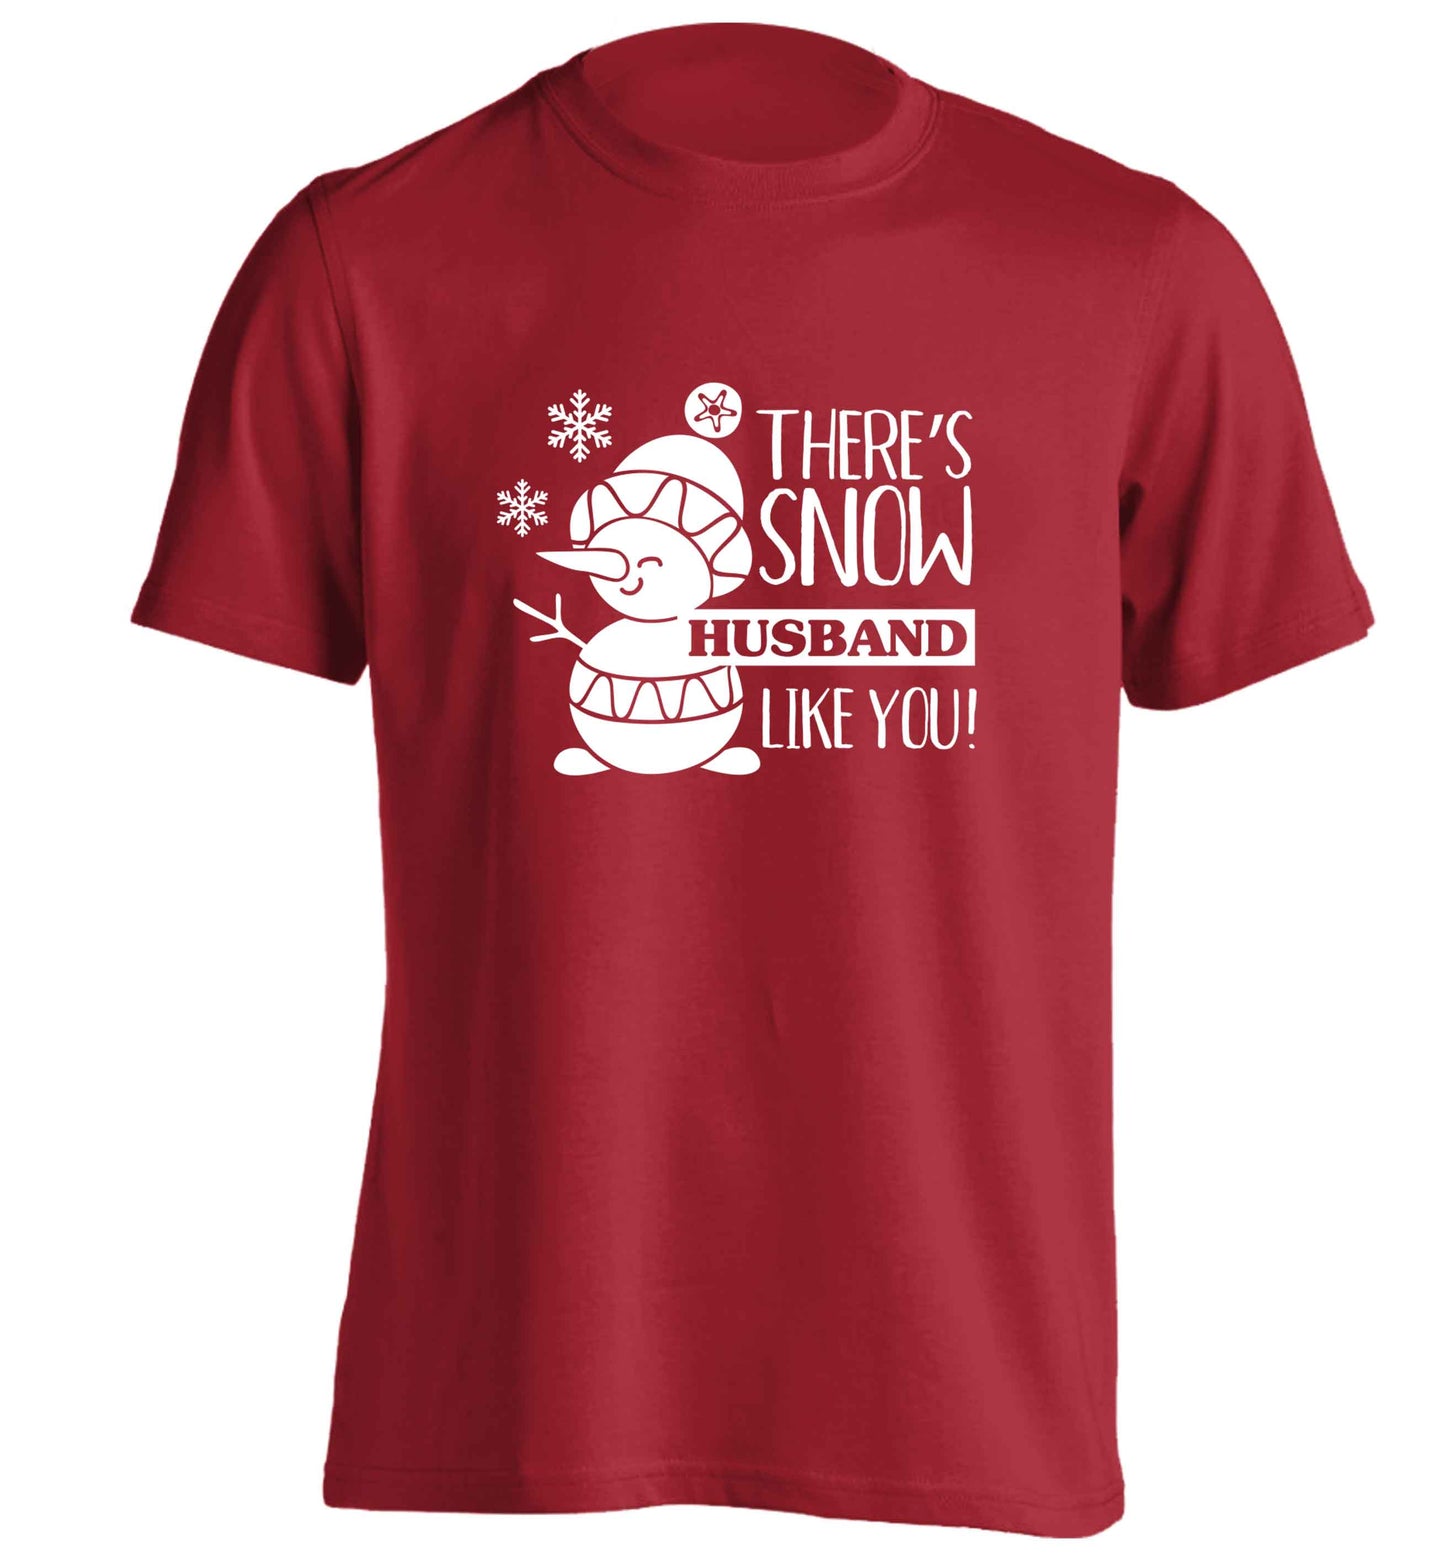 There's snow husband like you adults unisex red Tshirt 2XL